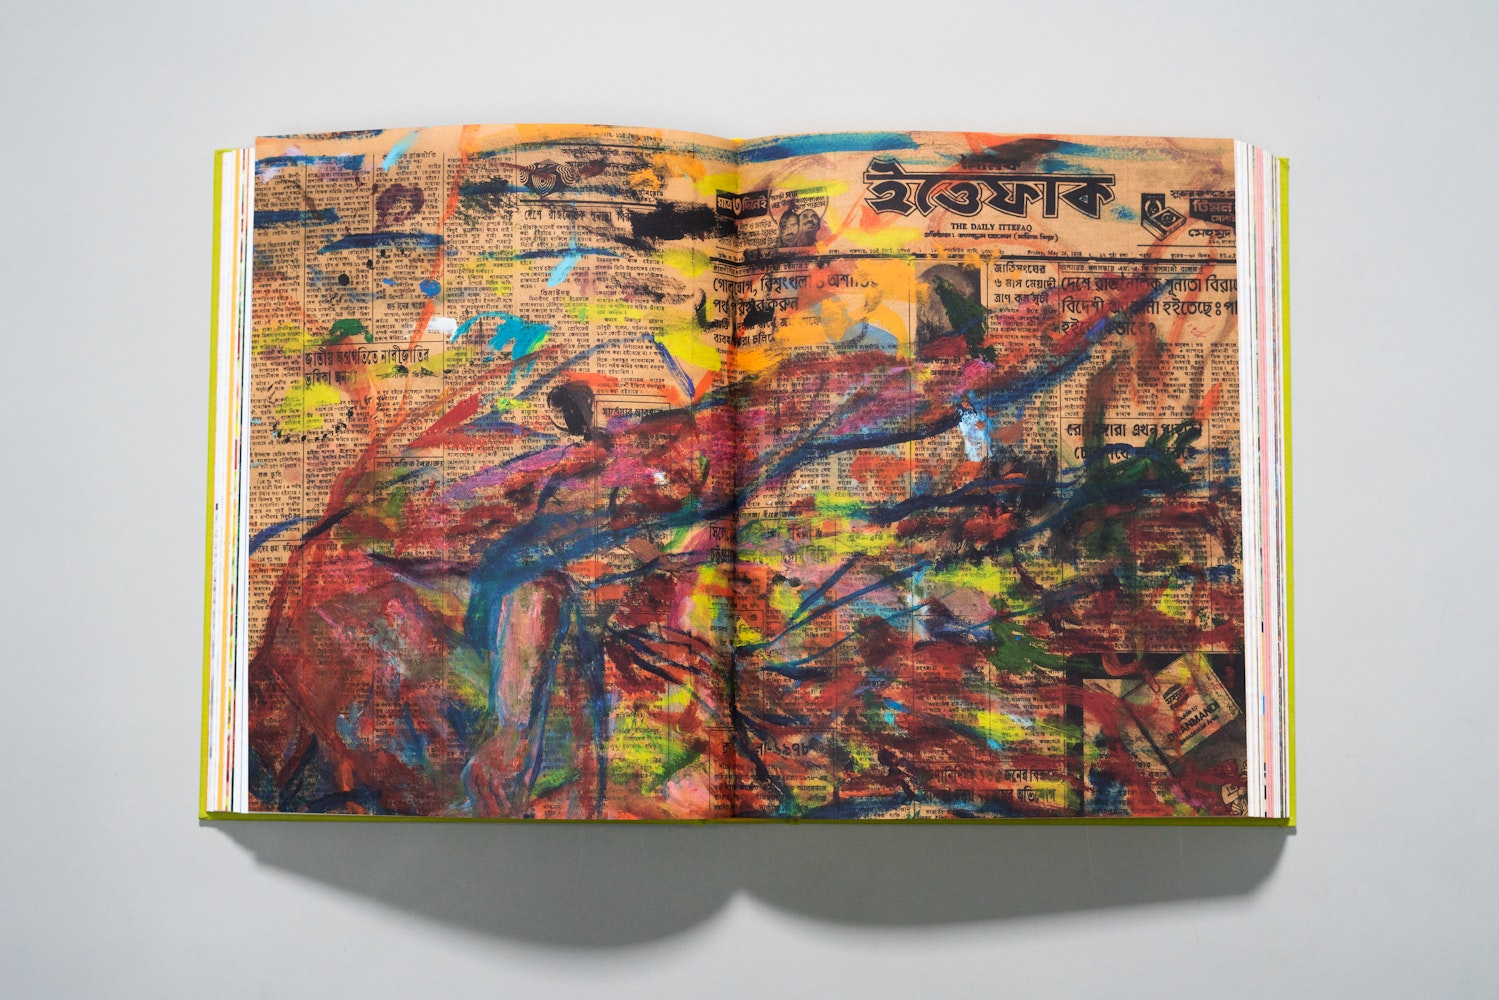 Spread of a large art book is open to a page of a colorful painting.